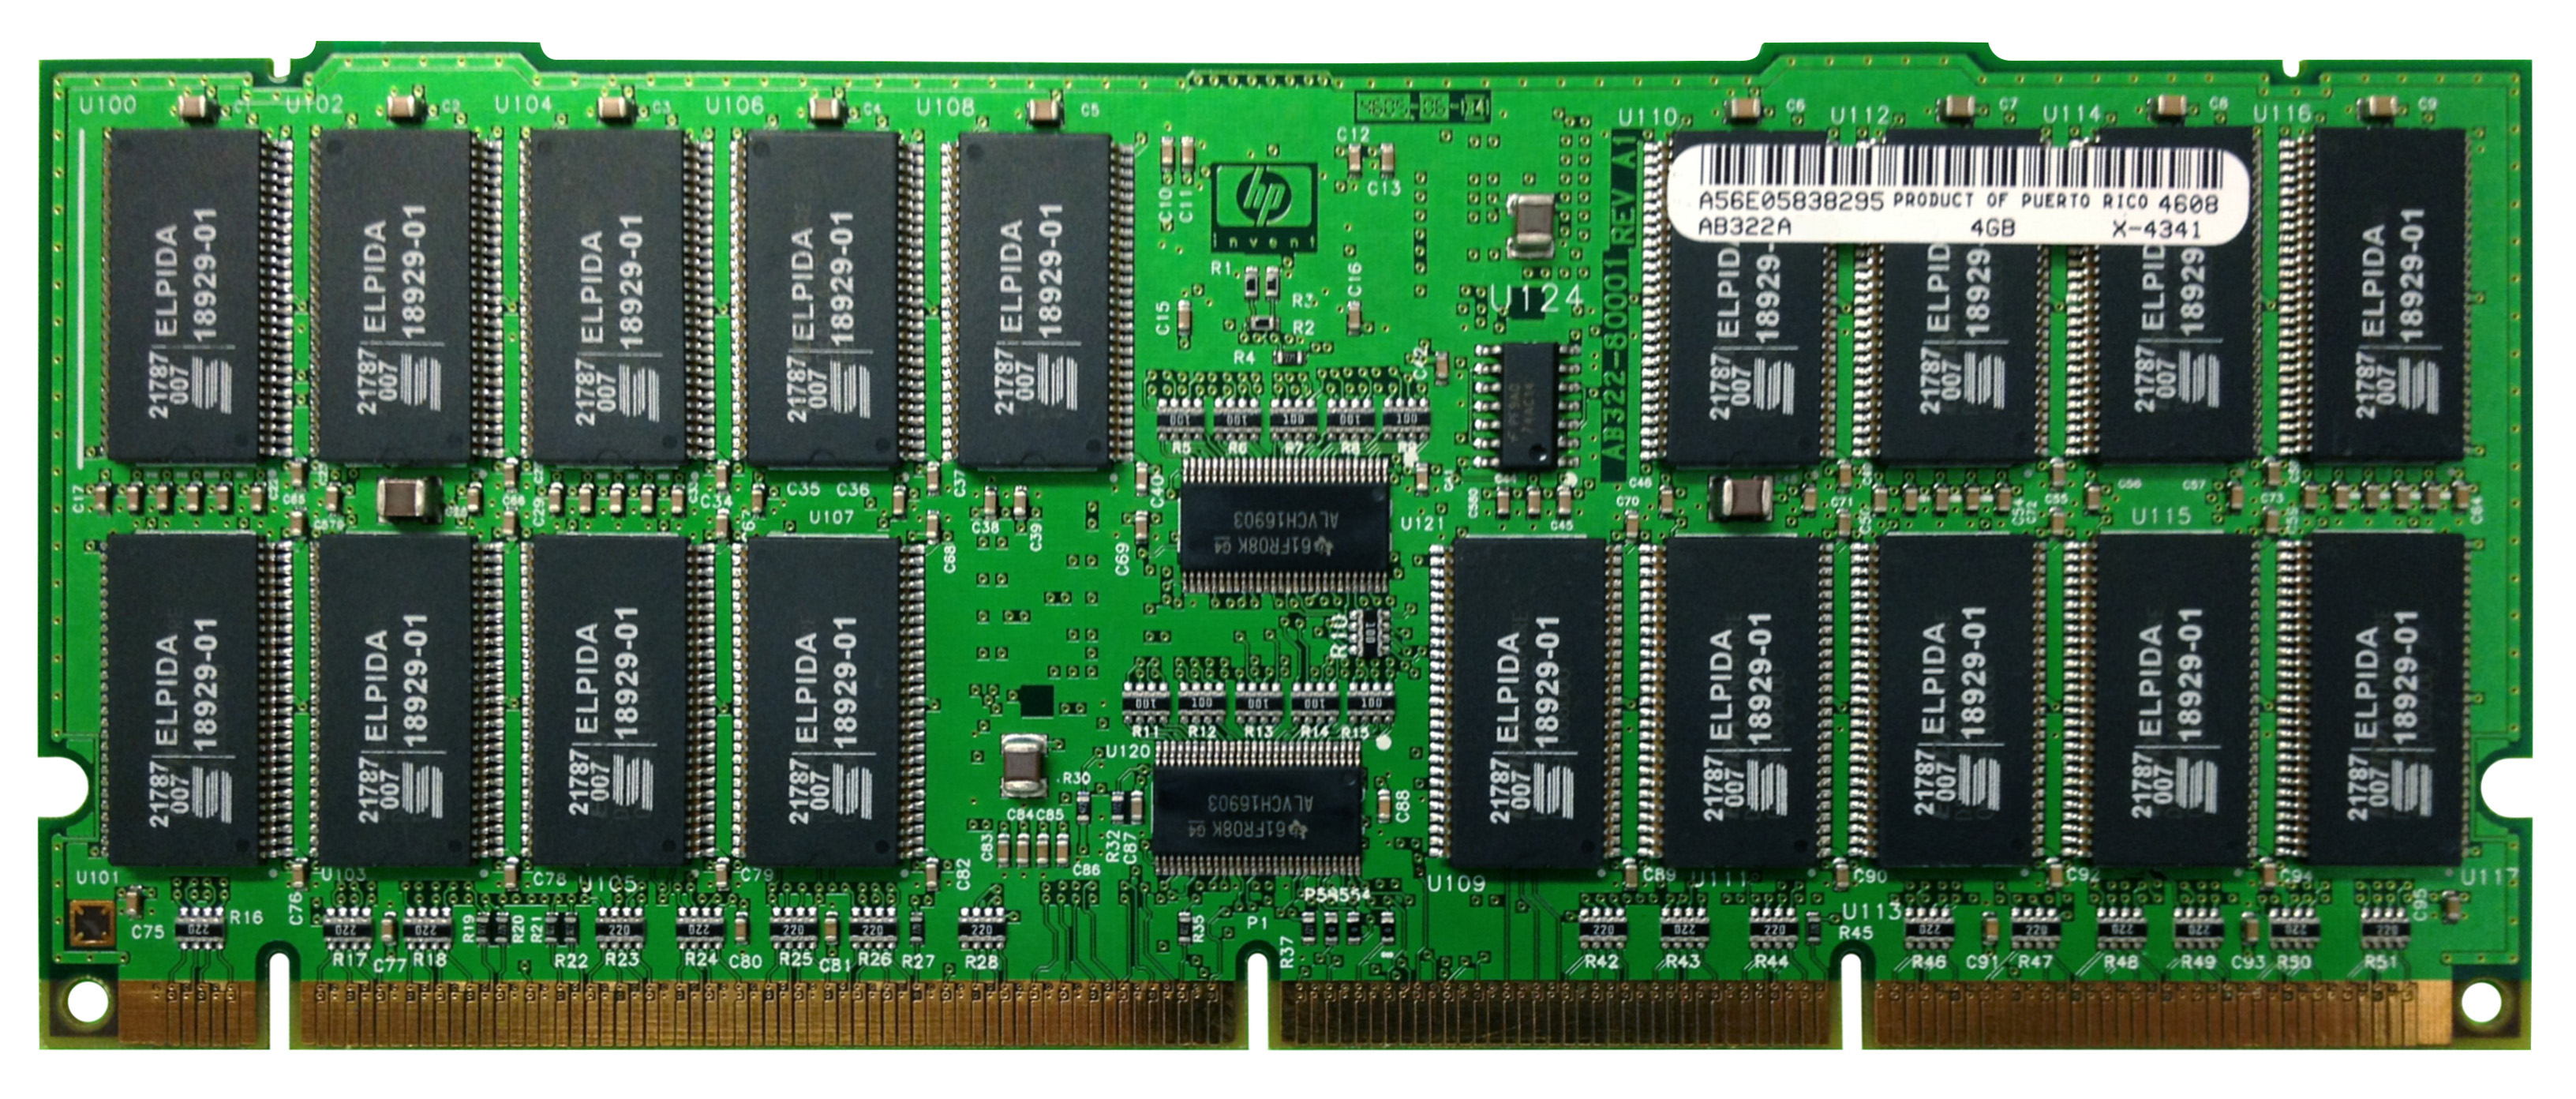 AB322-60001 HP 4GB PC133 133MHz ECC Registered High-Density 278-Pin SyncDRAM DIMM Memory Module for rp8420/rp7410/rx7620 Server